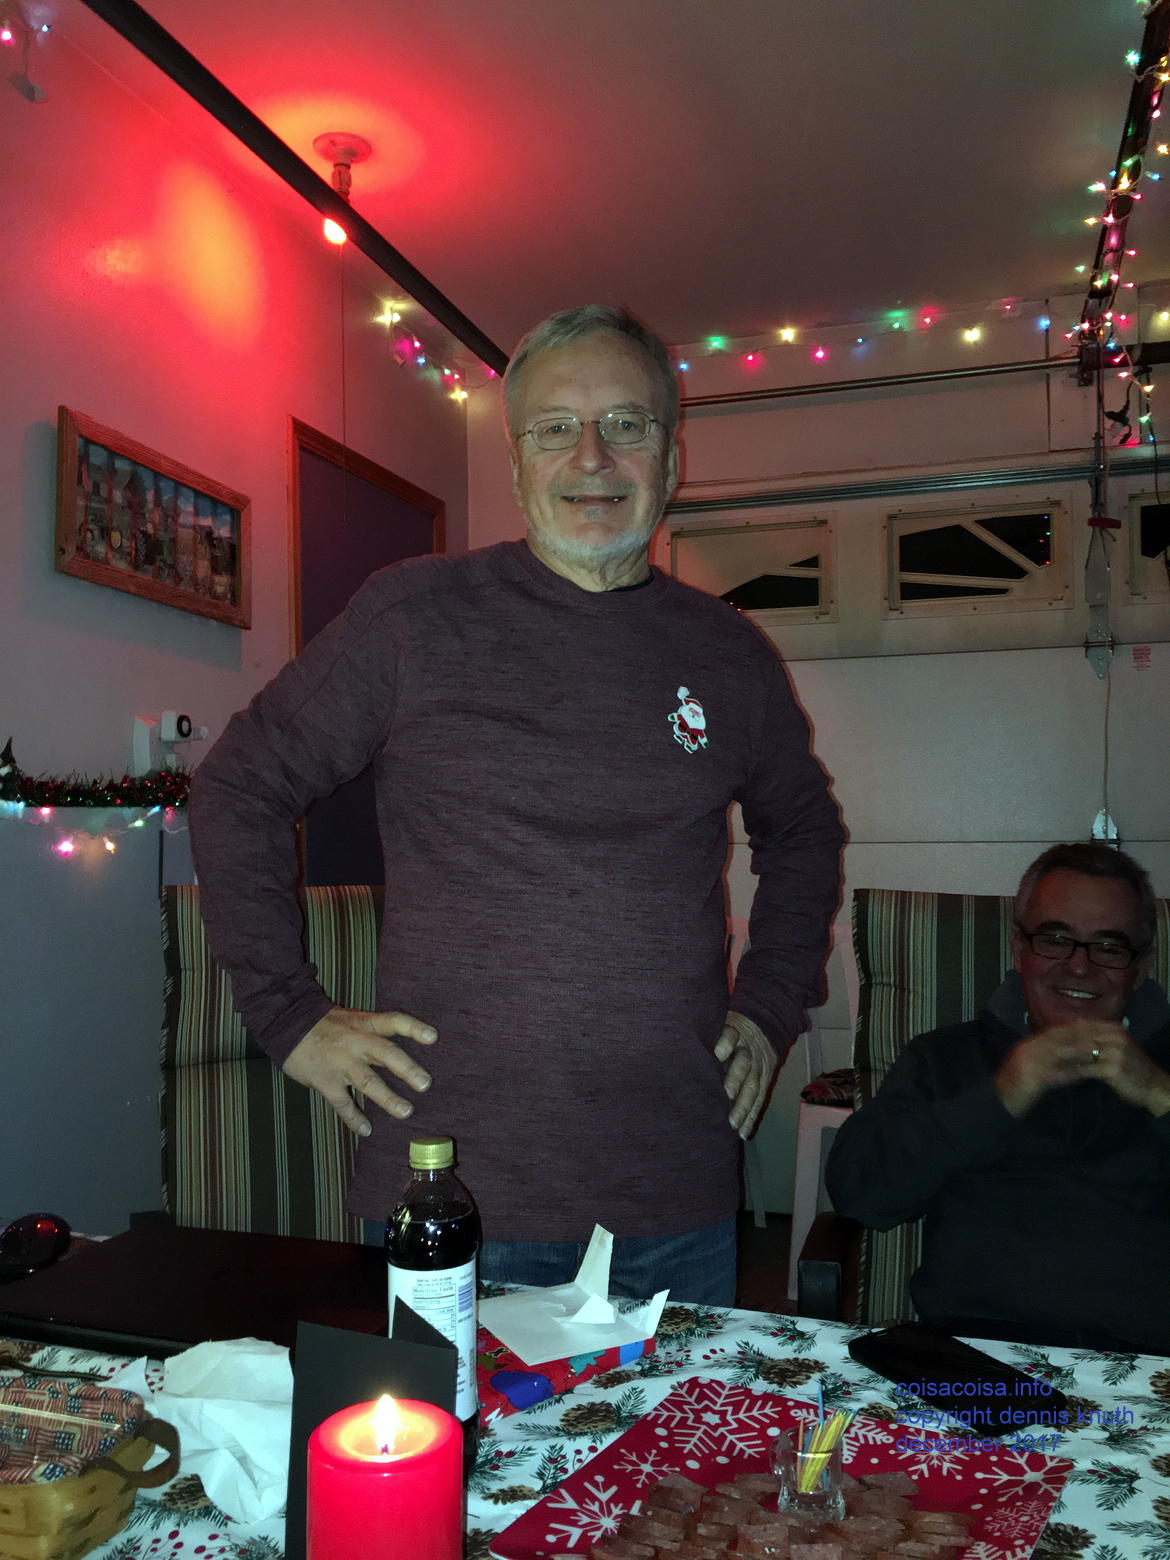 Dennis Knuth looking good on his 70th birday